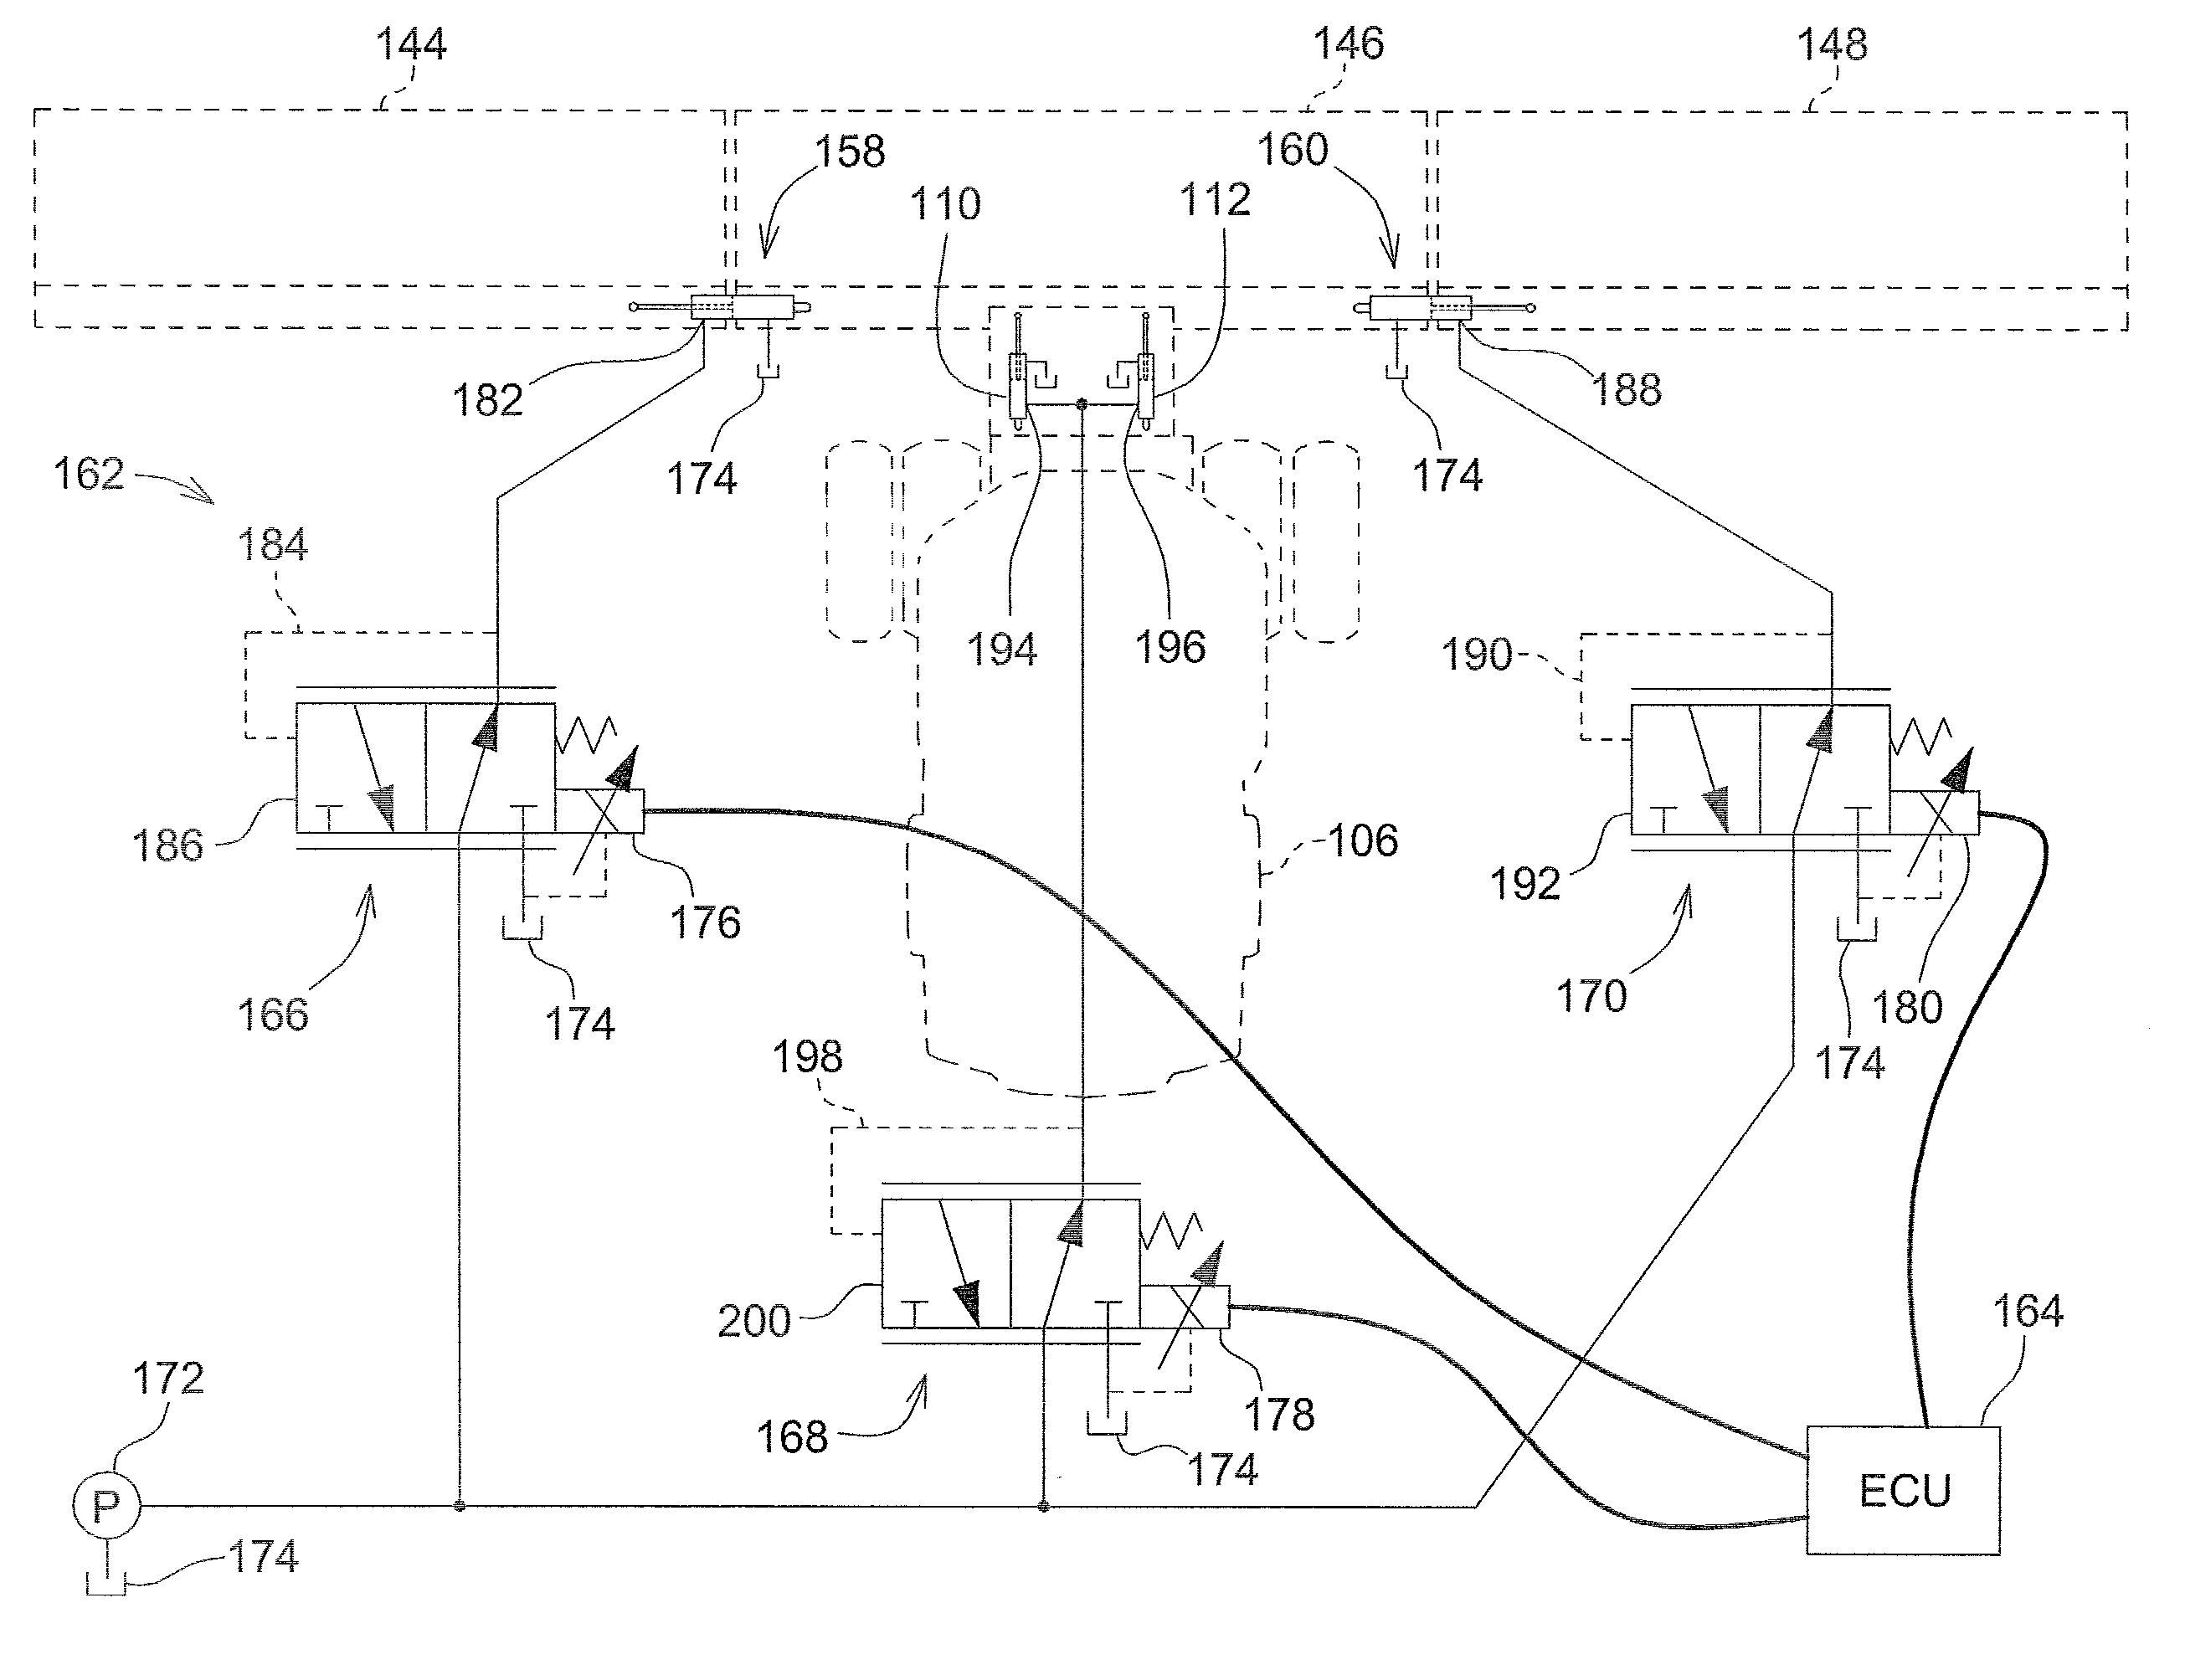 Articulated harvesting head ground force control circuit